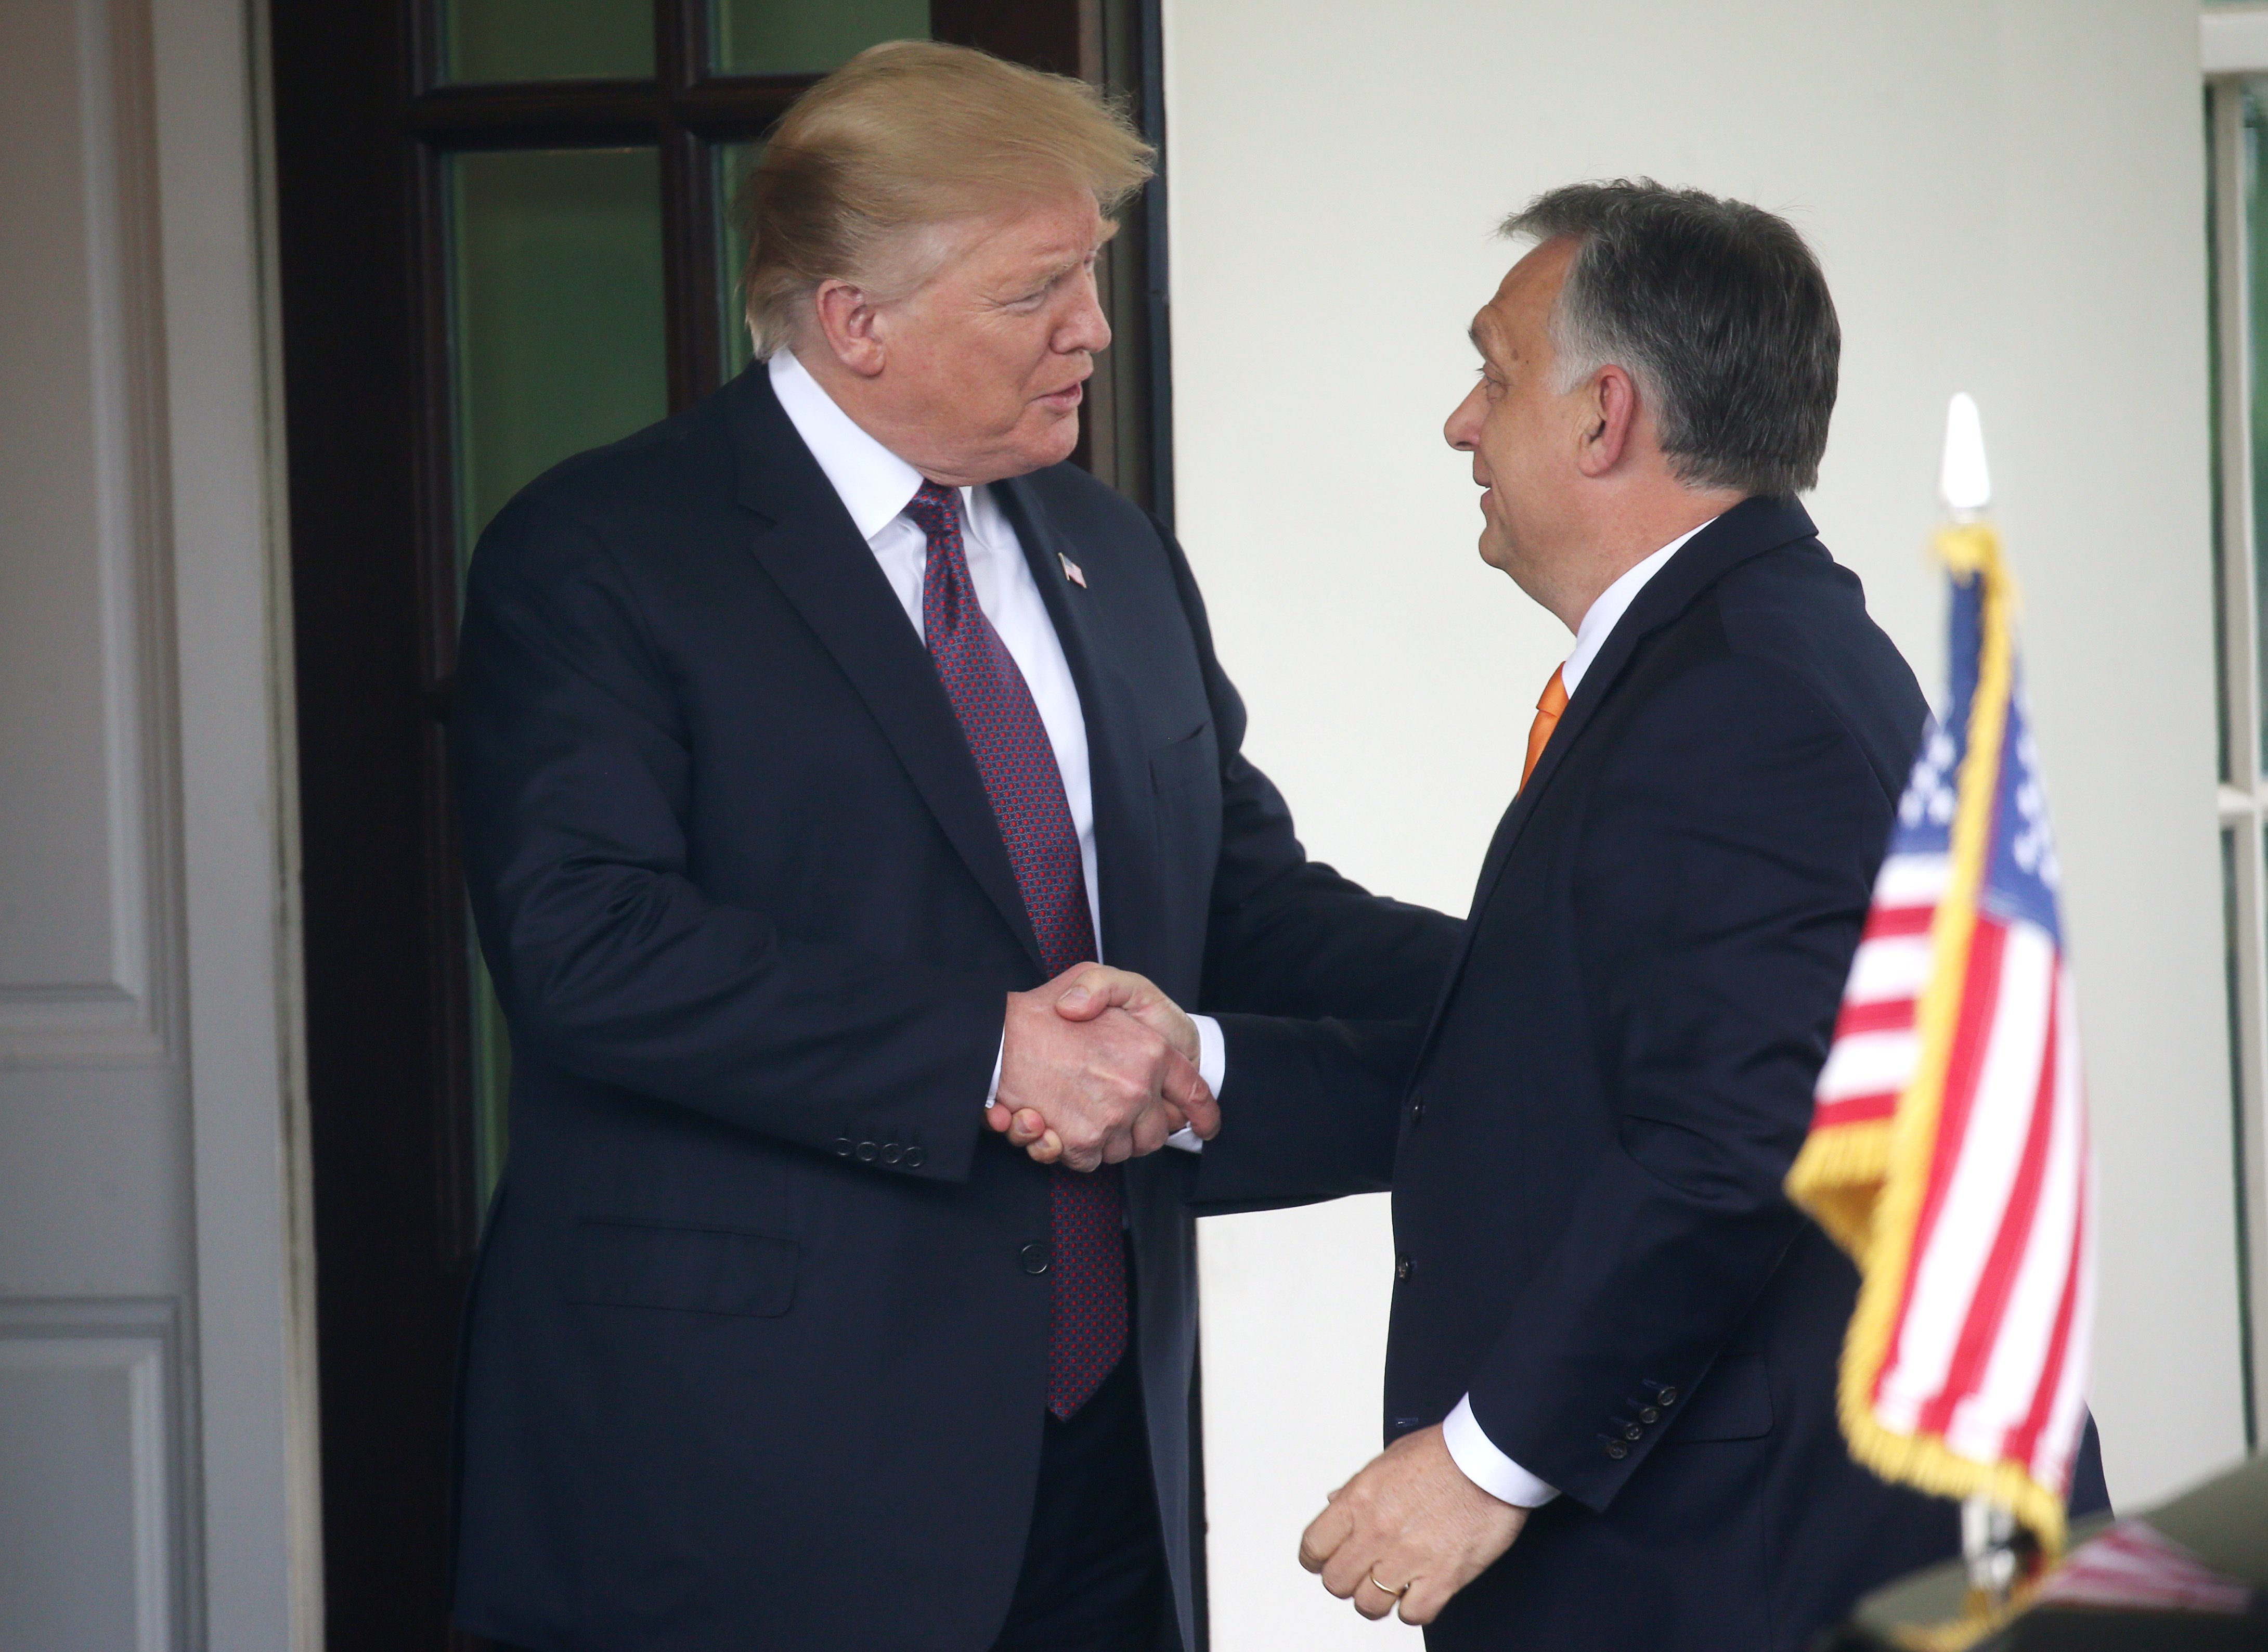 U.S. President Donald Trump welcomes Hungary's Prime Minister Viktor Orban as he arrives for meetings at the White House in Washington, U.S., May 13, 2019. REUTERS/Leah Millis